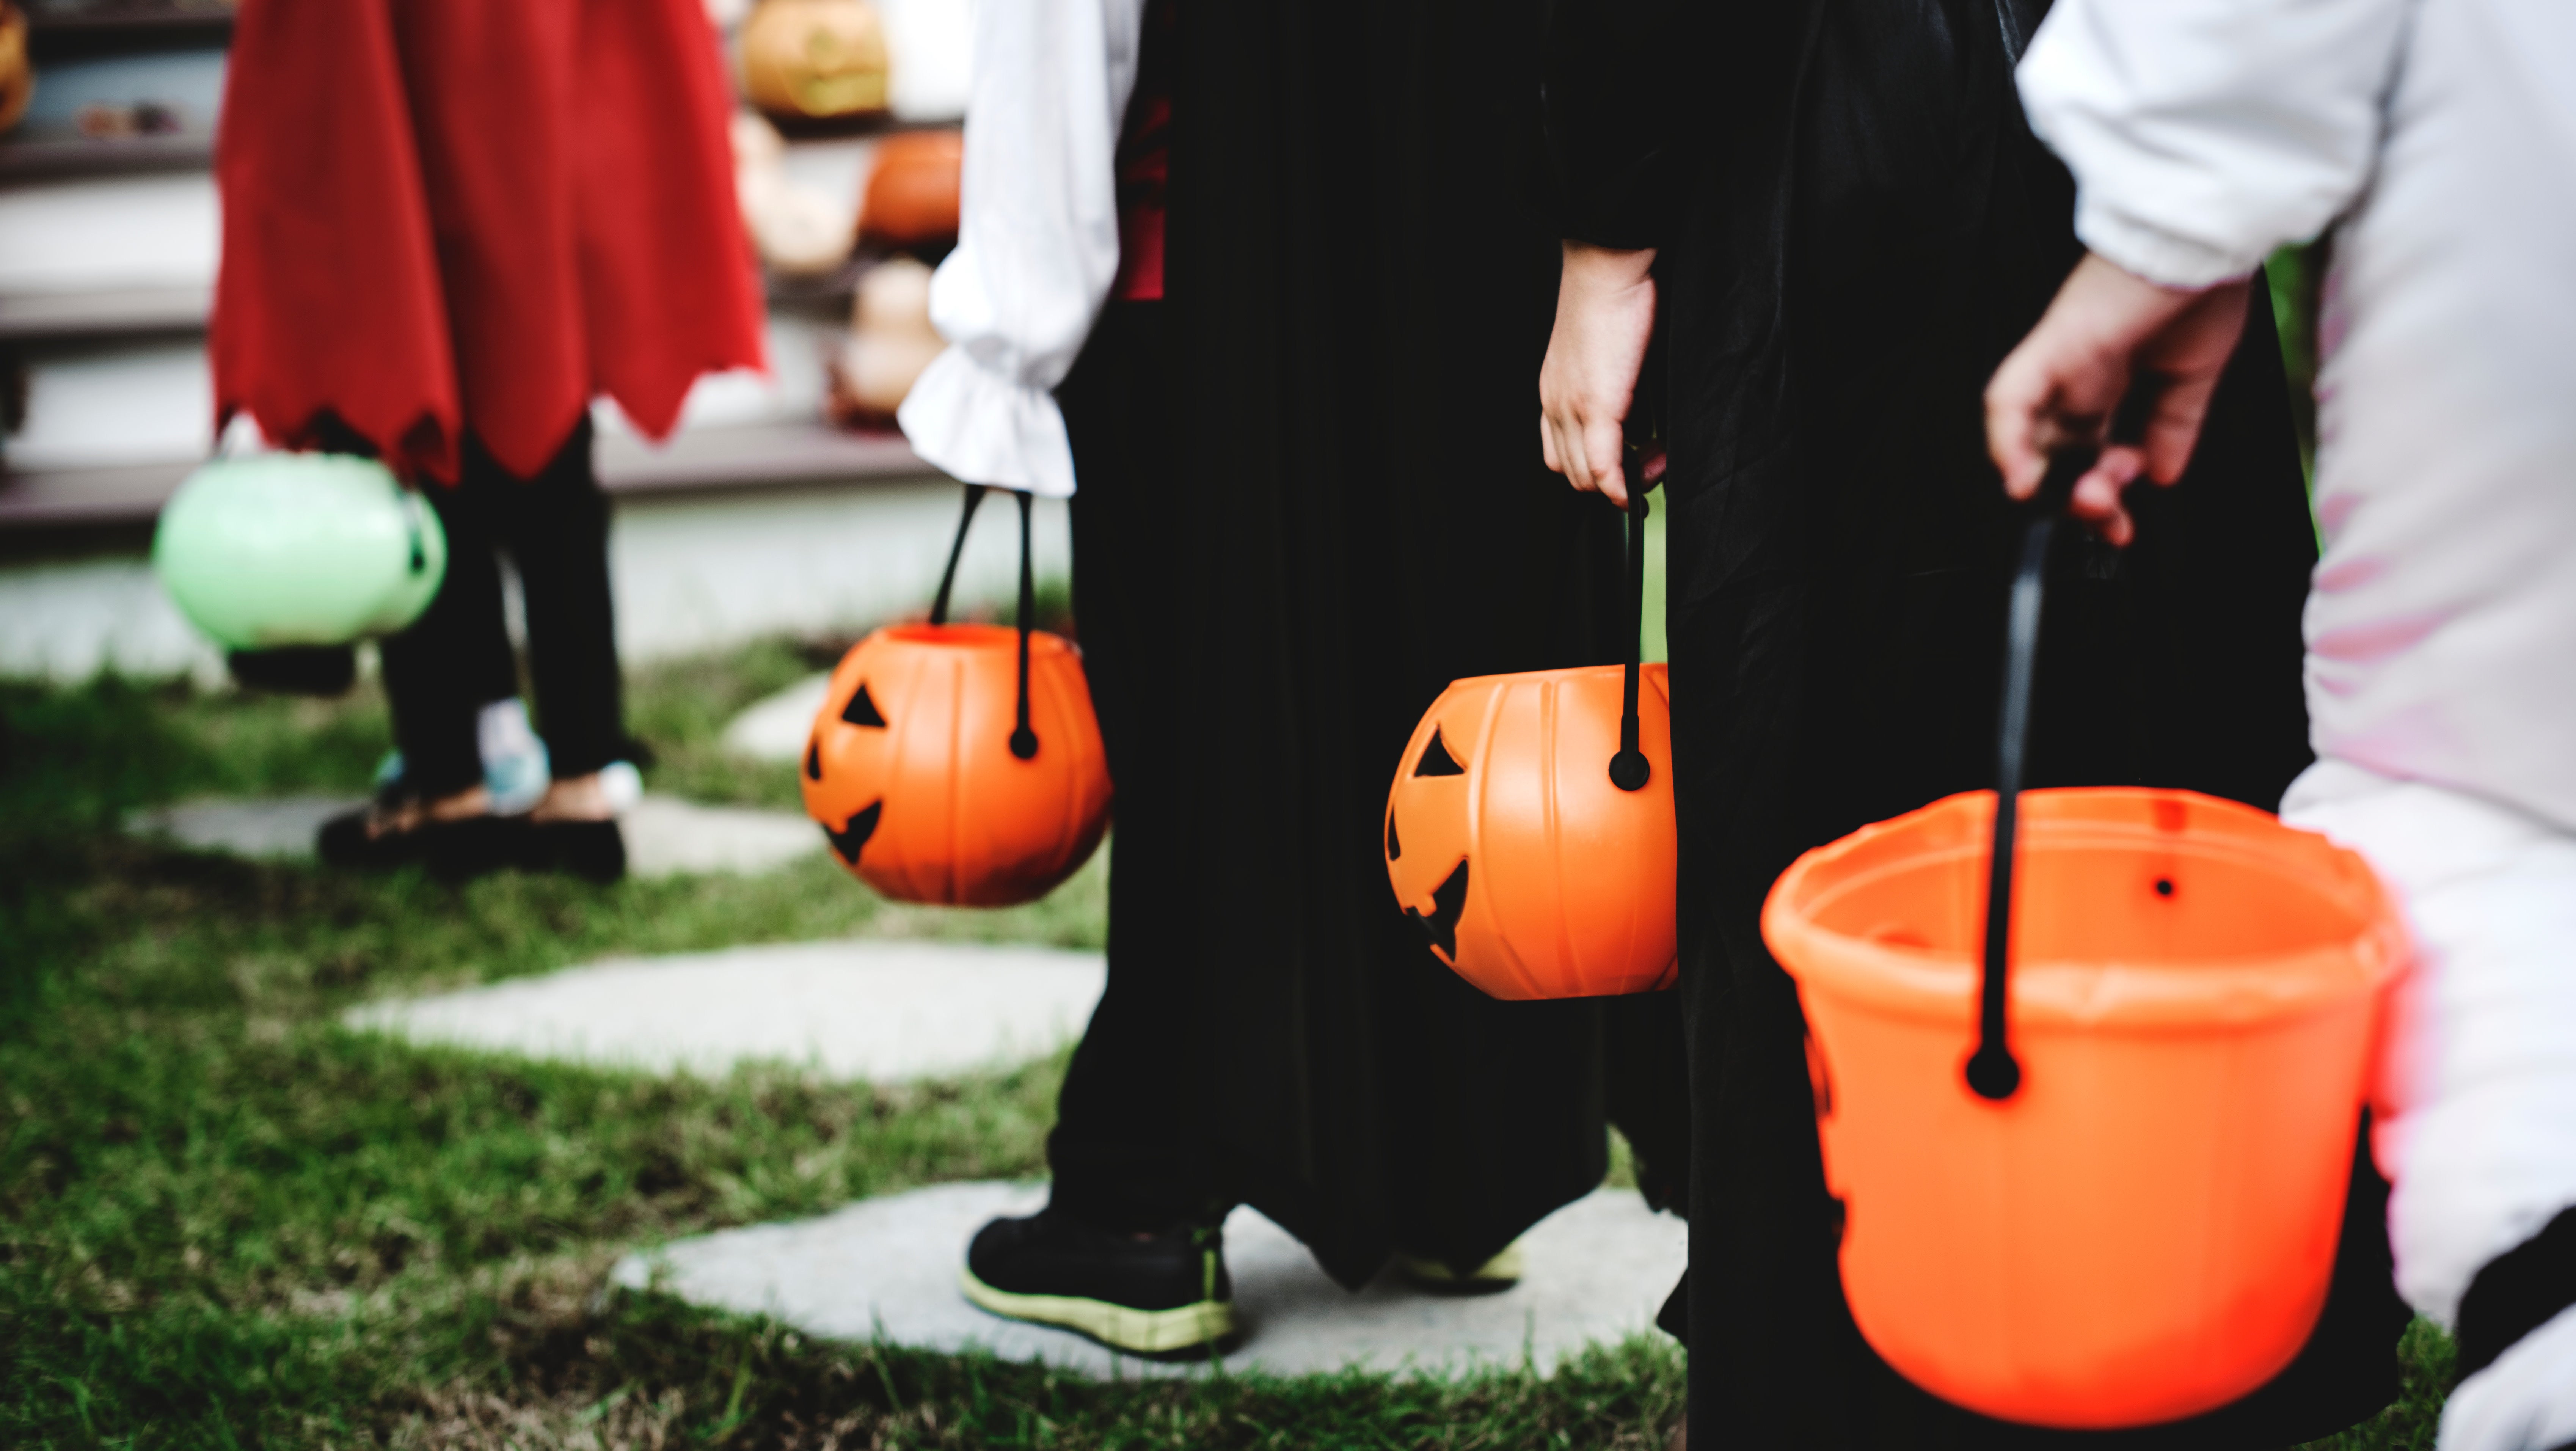 How To Find The Perfect Halloween Costume For Kids With Disabilities